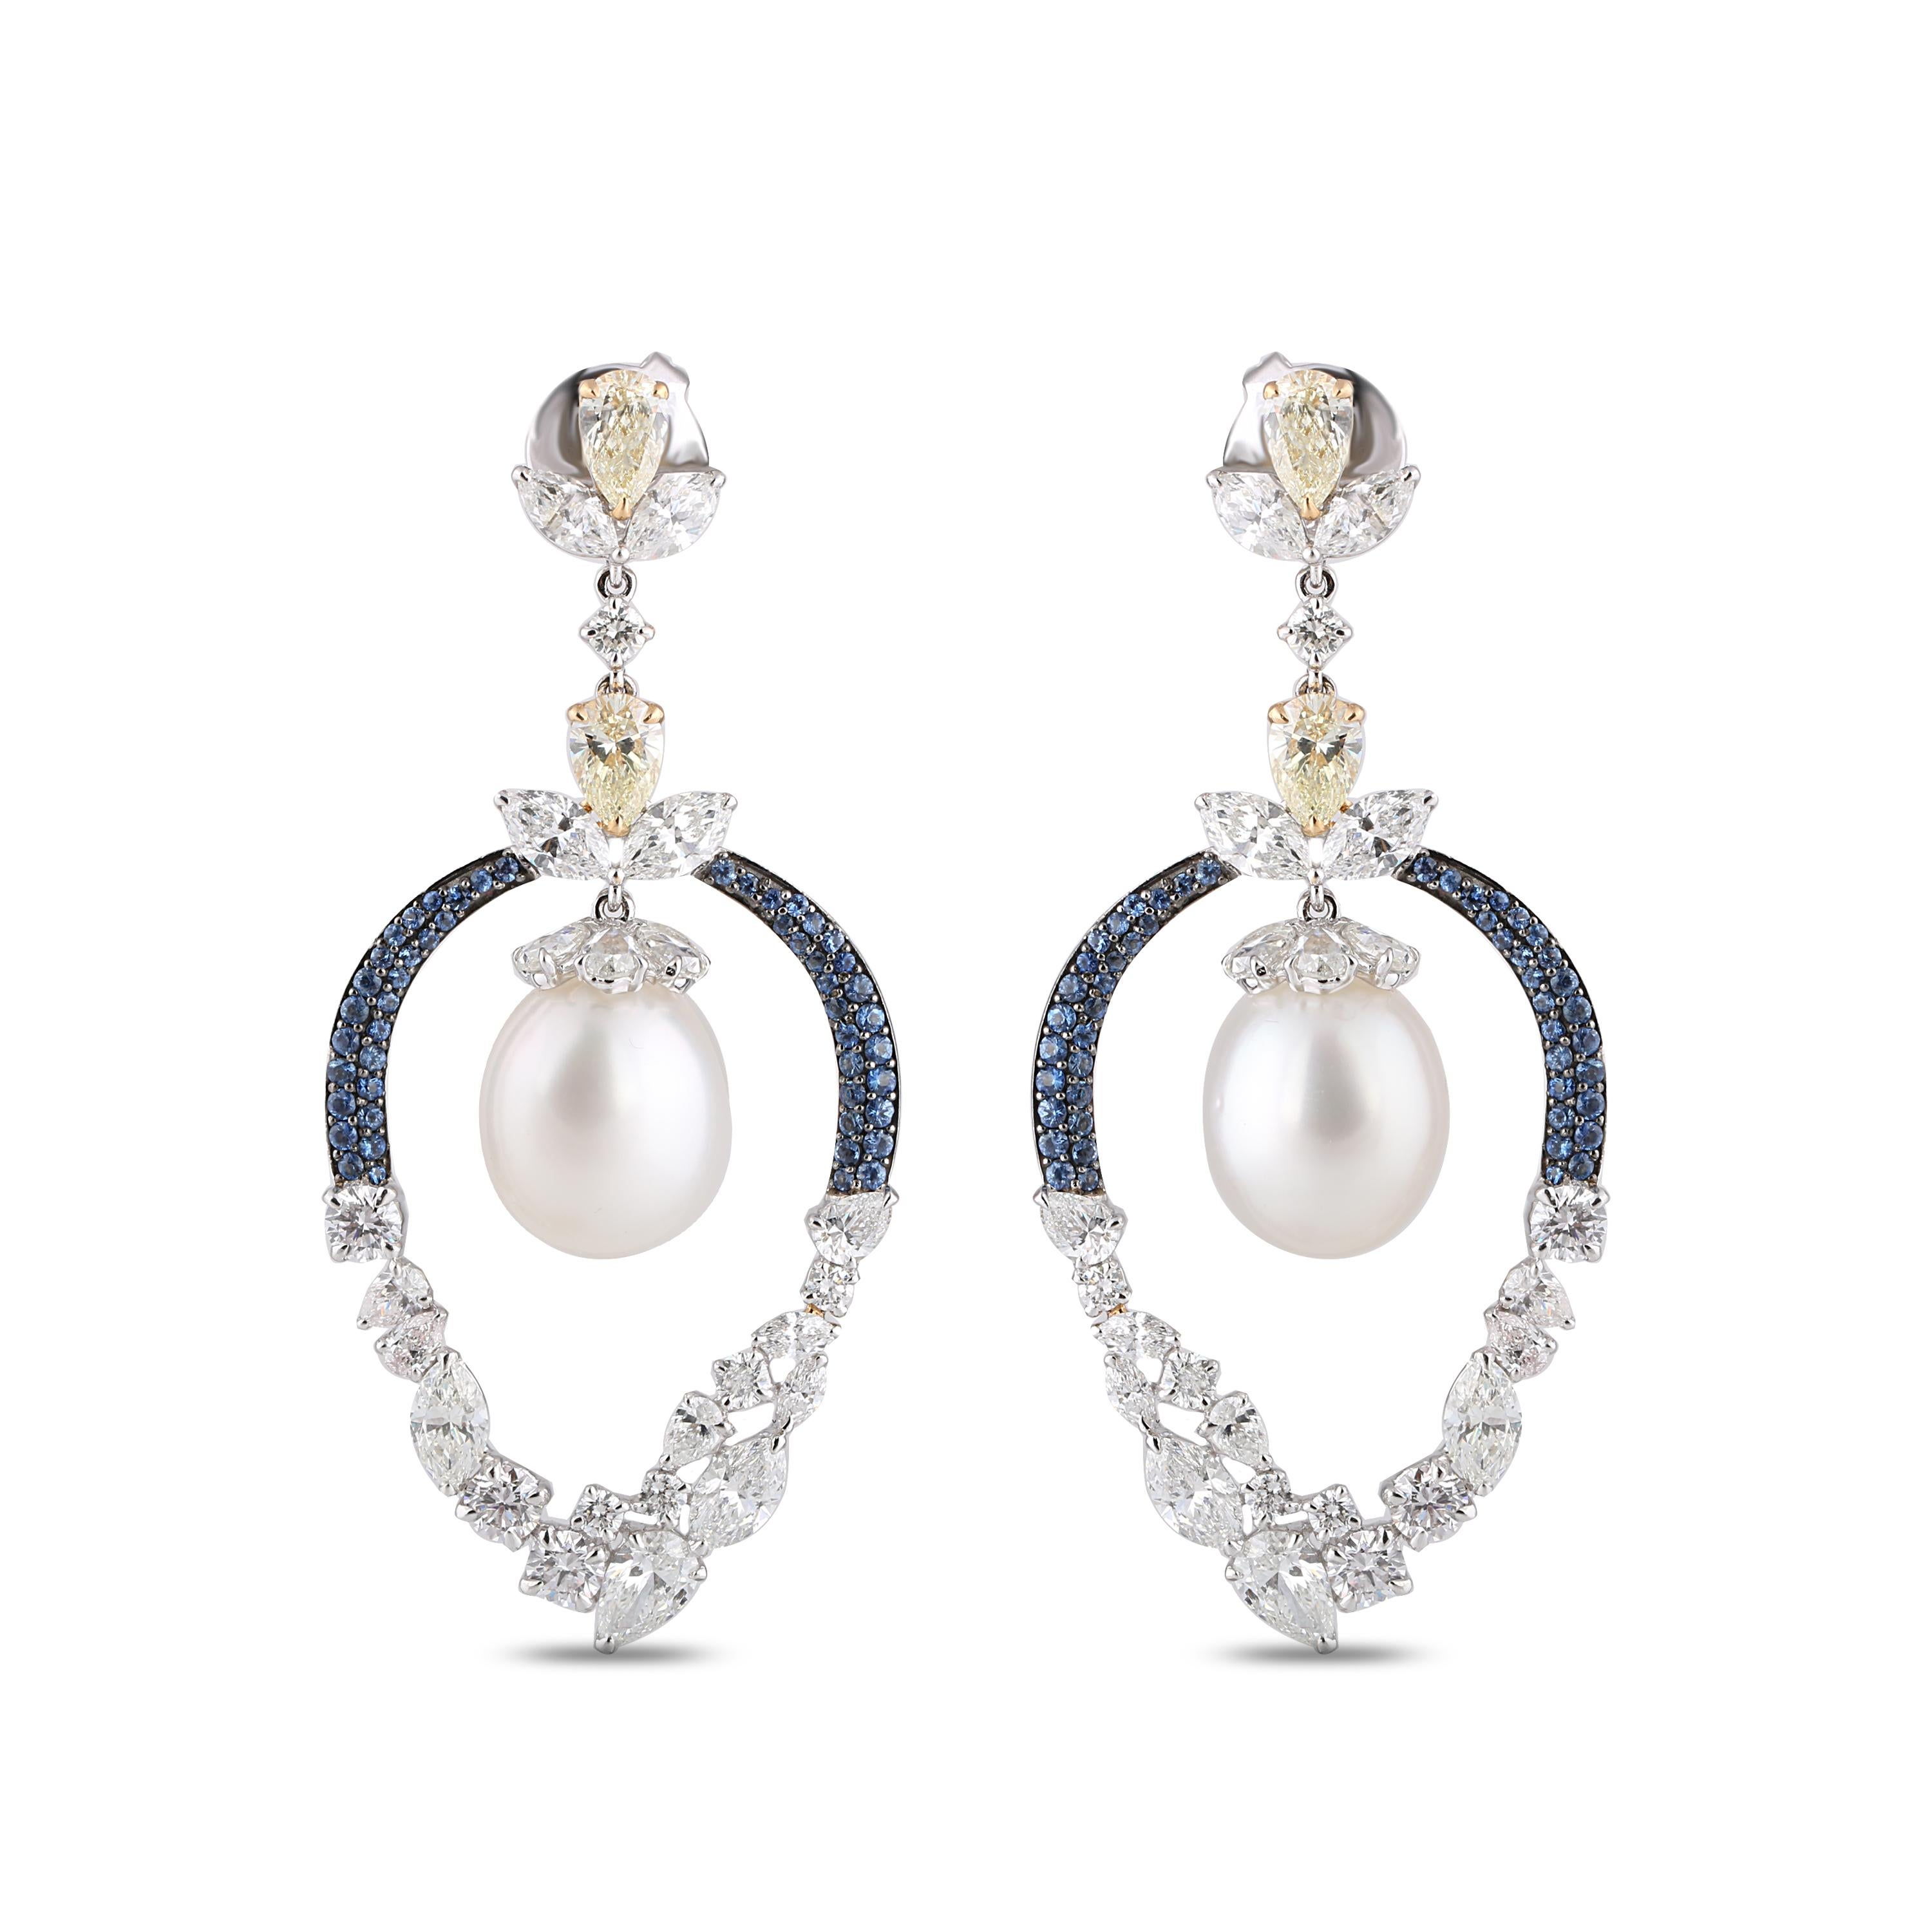 Brilliant cut and rosecut diamonds, south sea pearls and blue sapphire earrings

Add flair to your jewelry box with these masterfully handcrafted chandelier earrings set in 18k white gold. The brilliant cut and rosecut diamonds are artistically